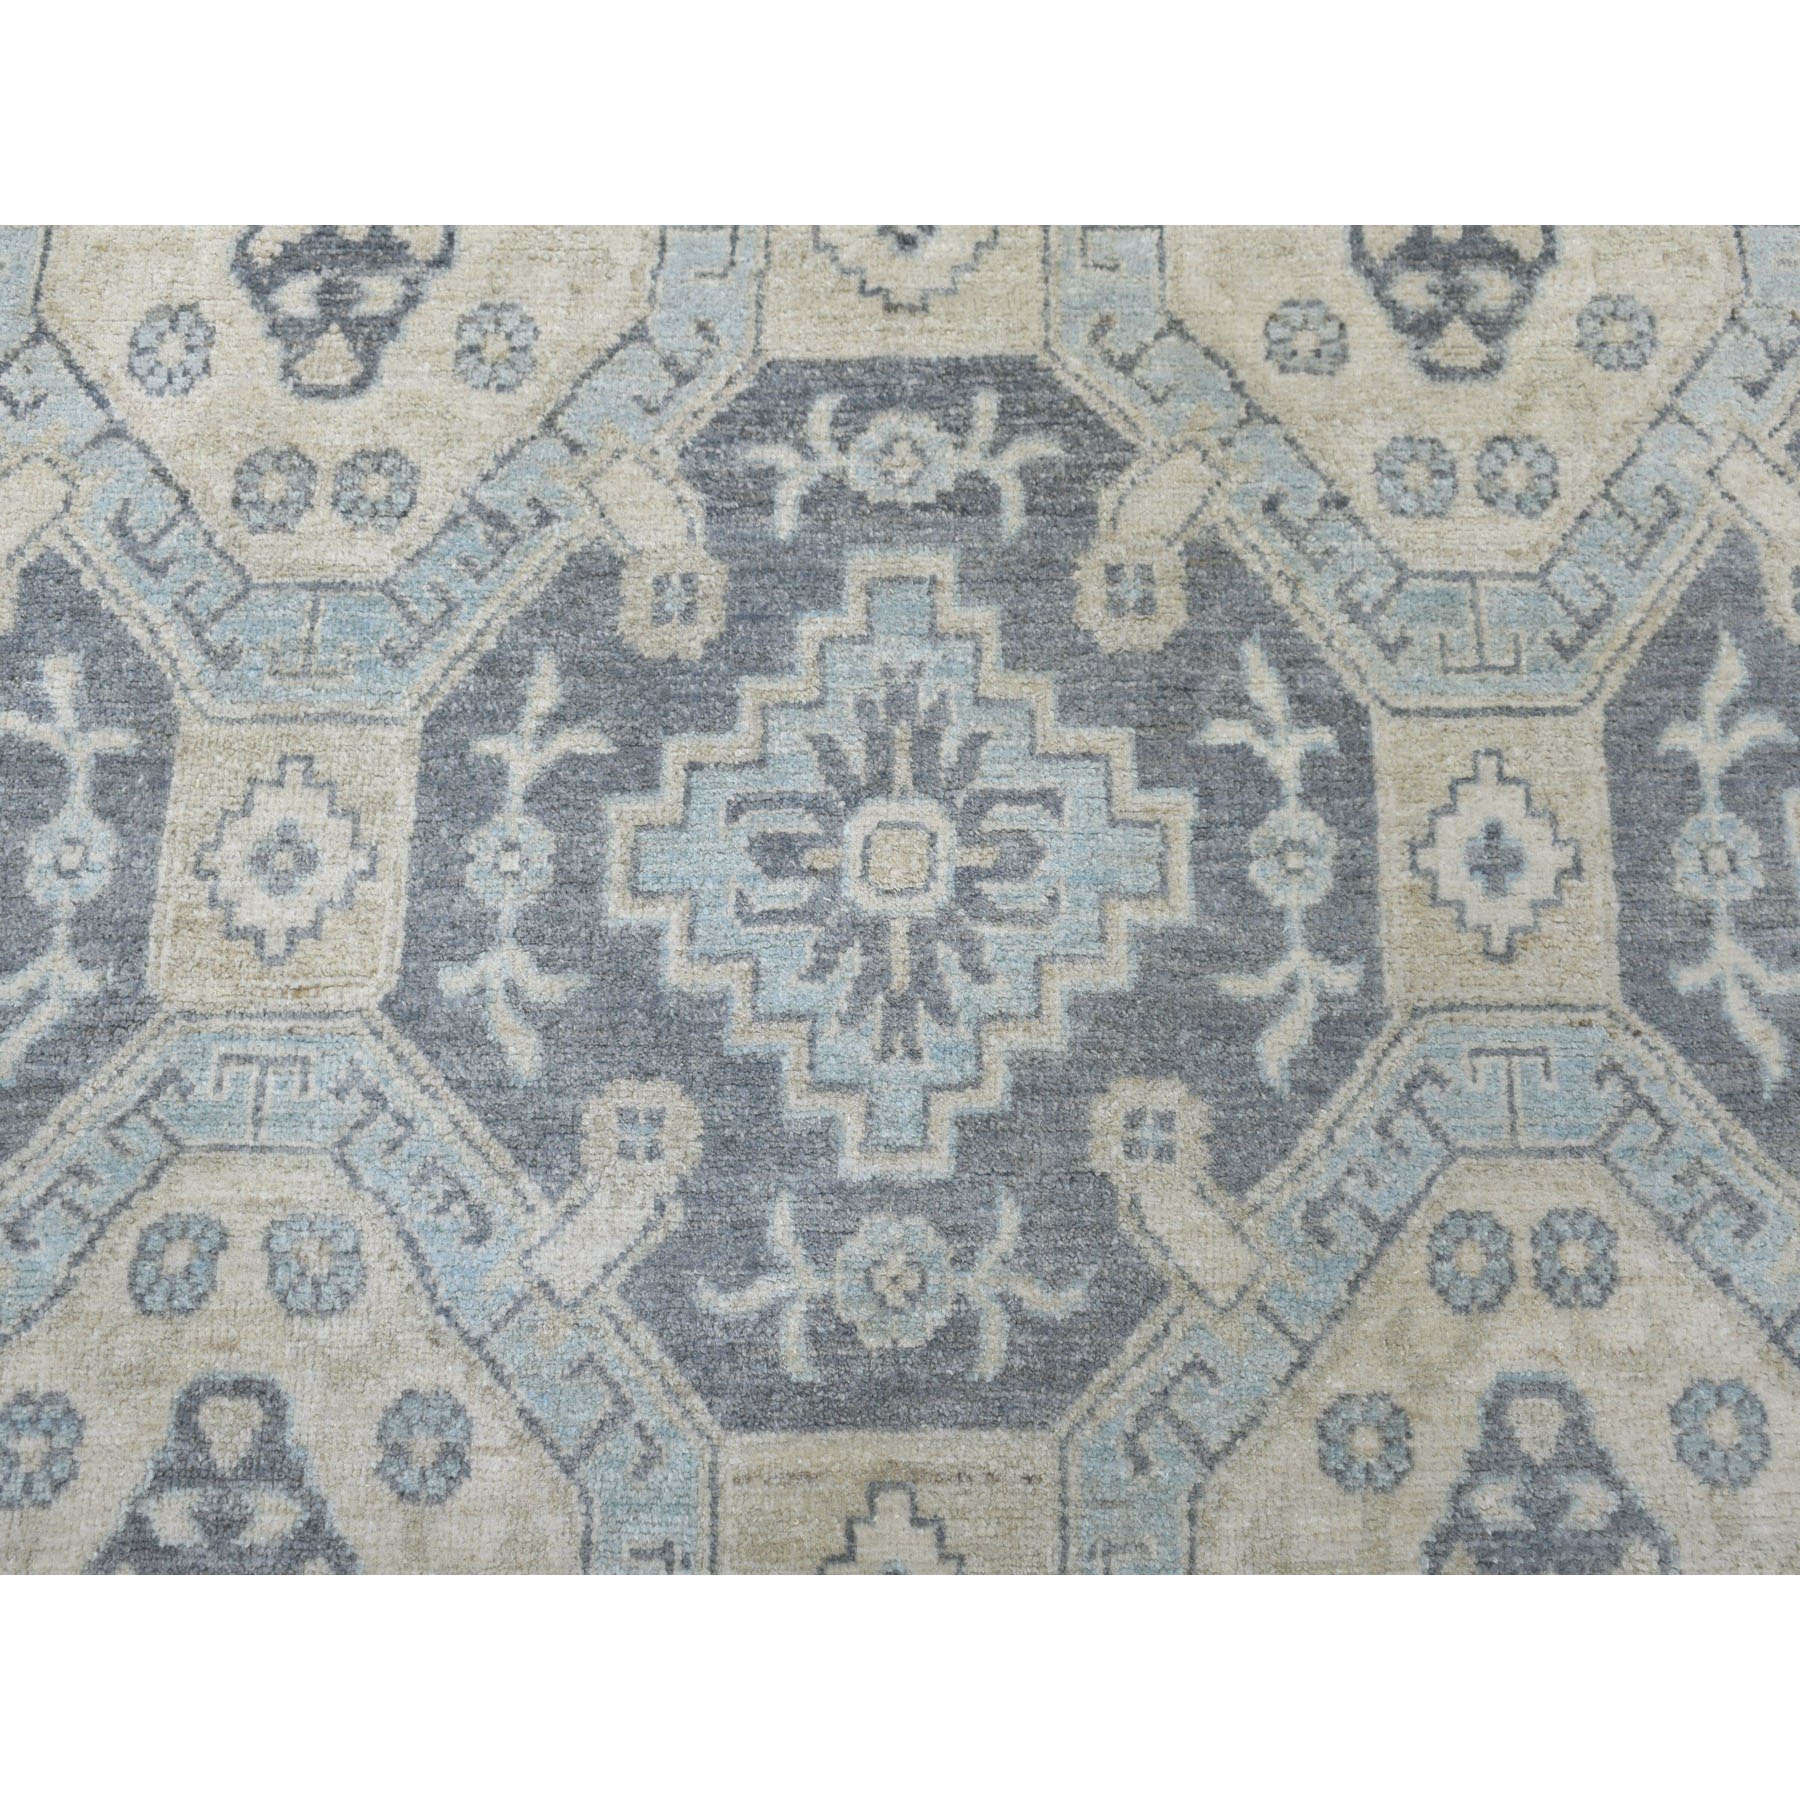 5-9 x8-6  White Wash Peshawar Pure Wool Hand-Knotted Oriental Rug 